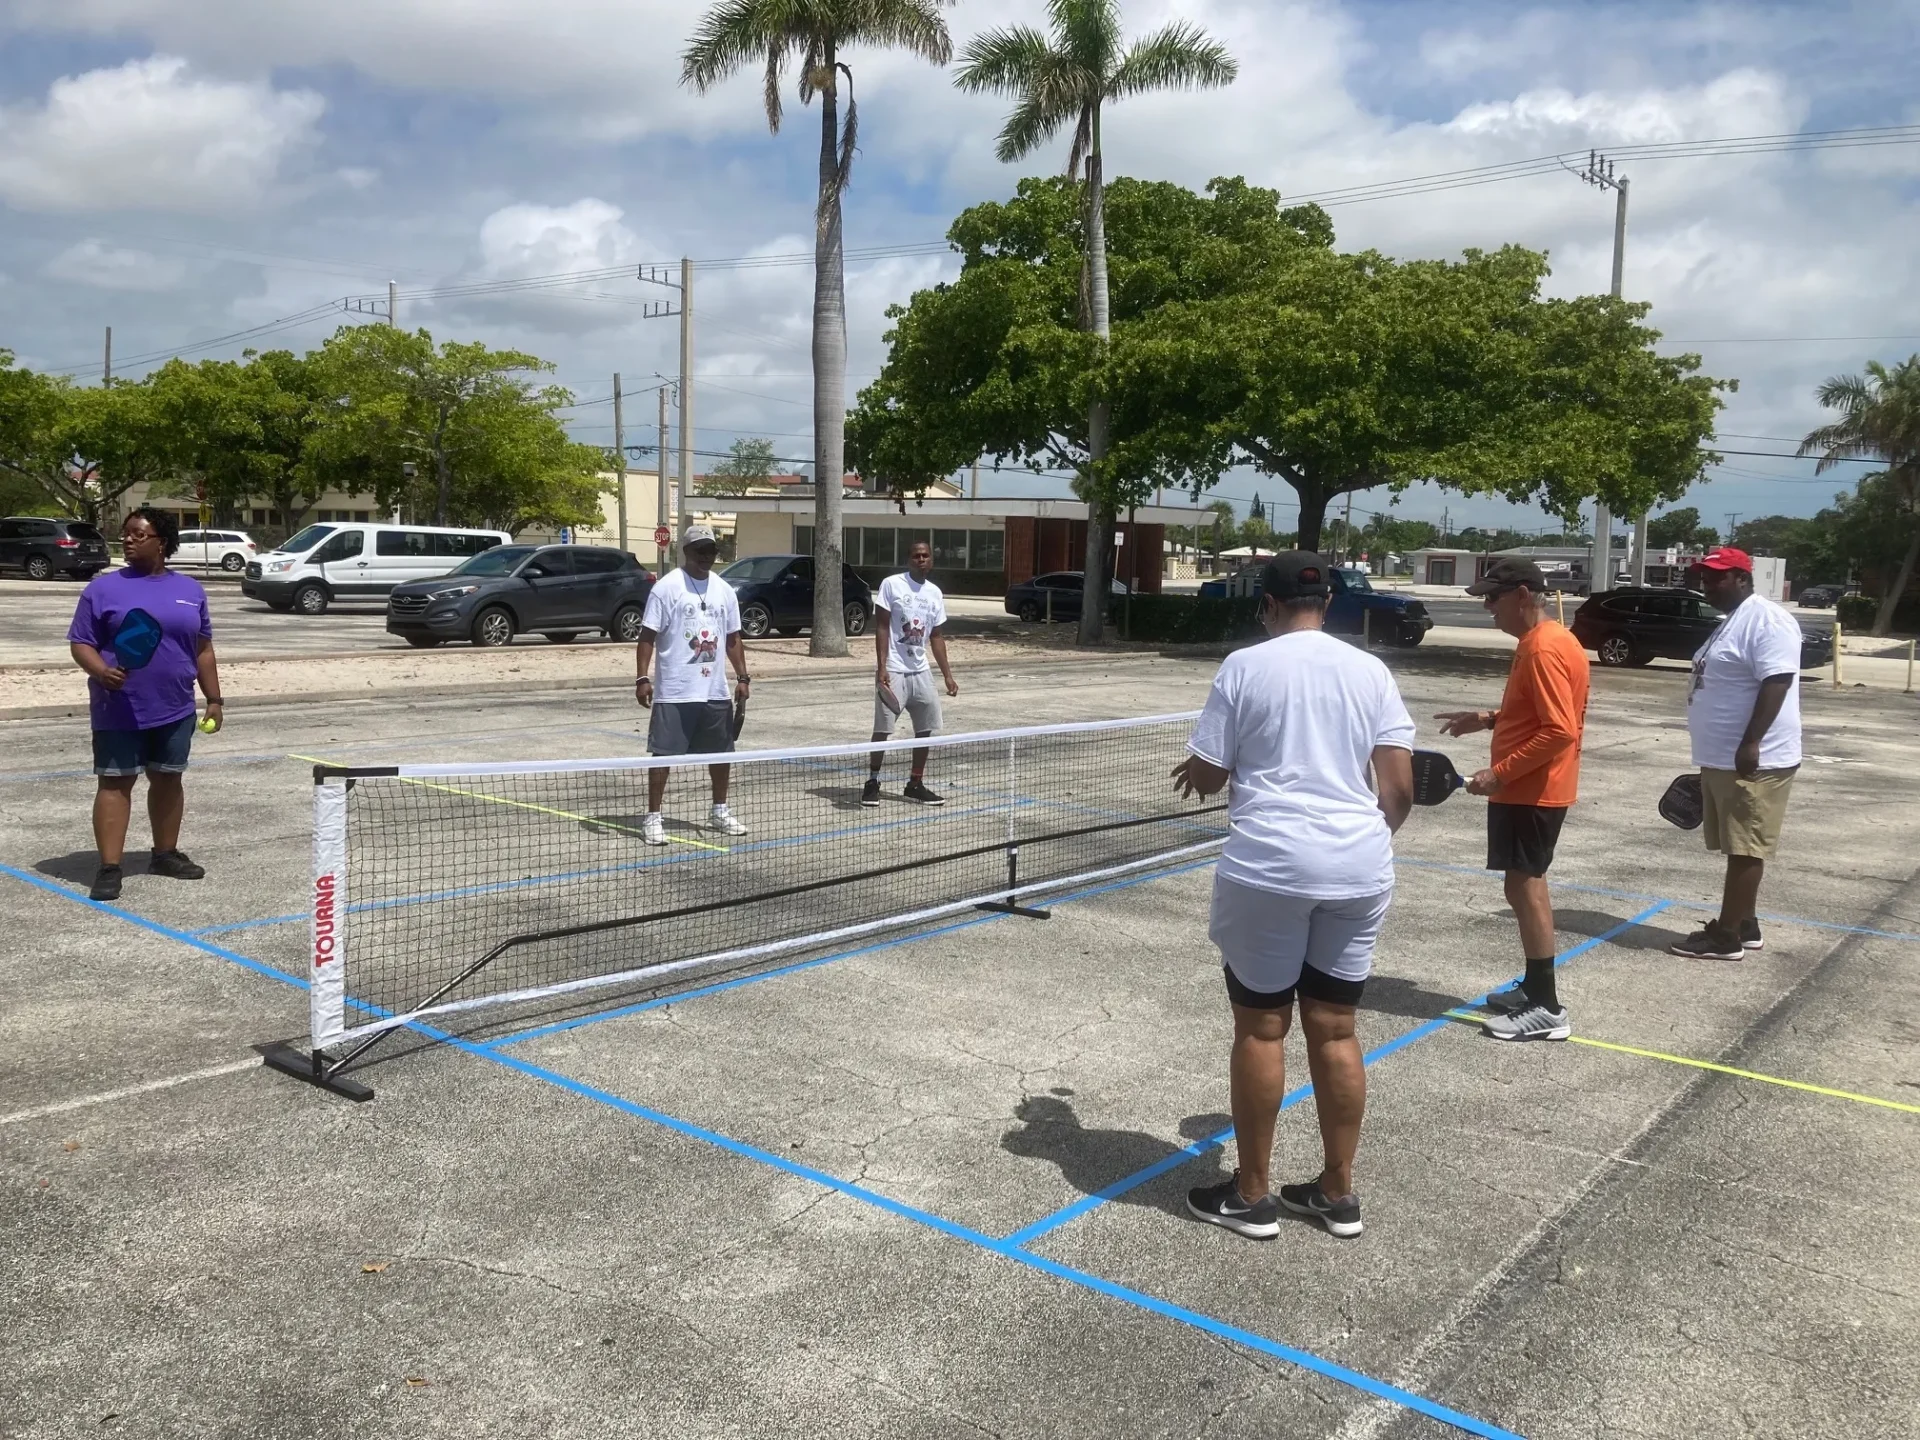 A group of people playing ping pong in the parking lot.